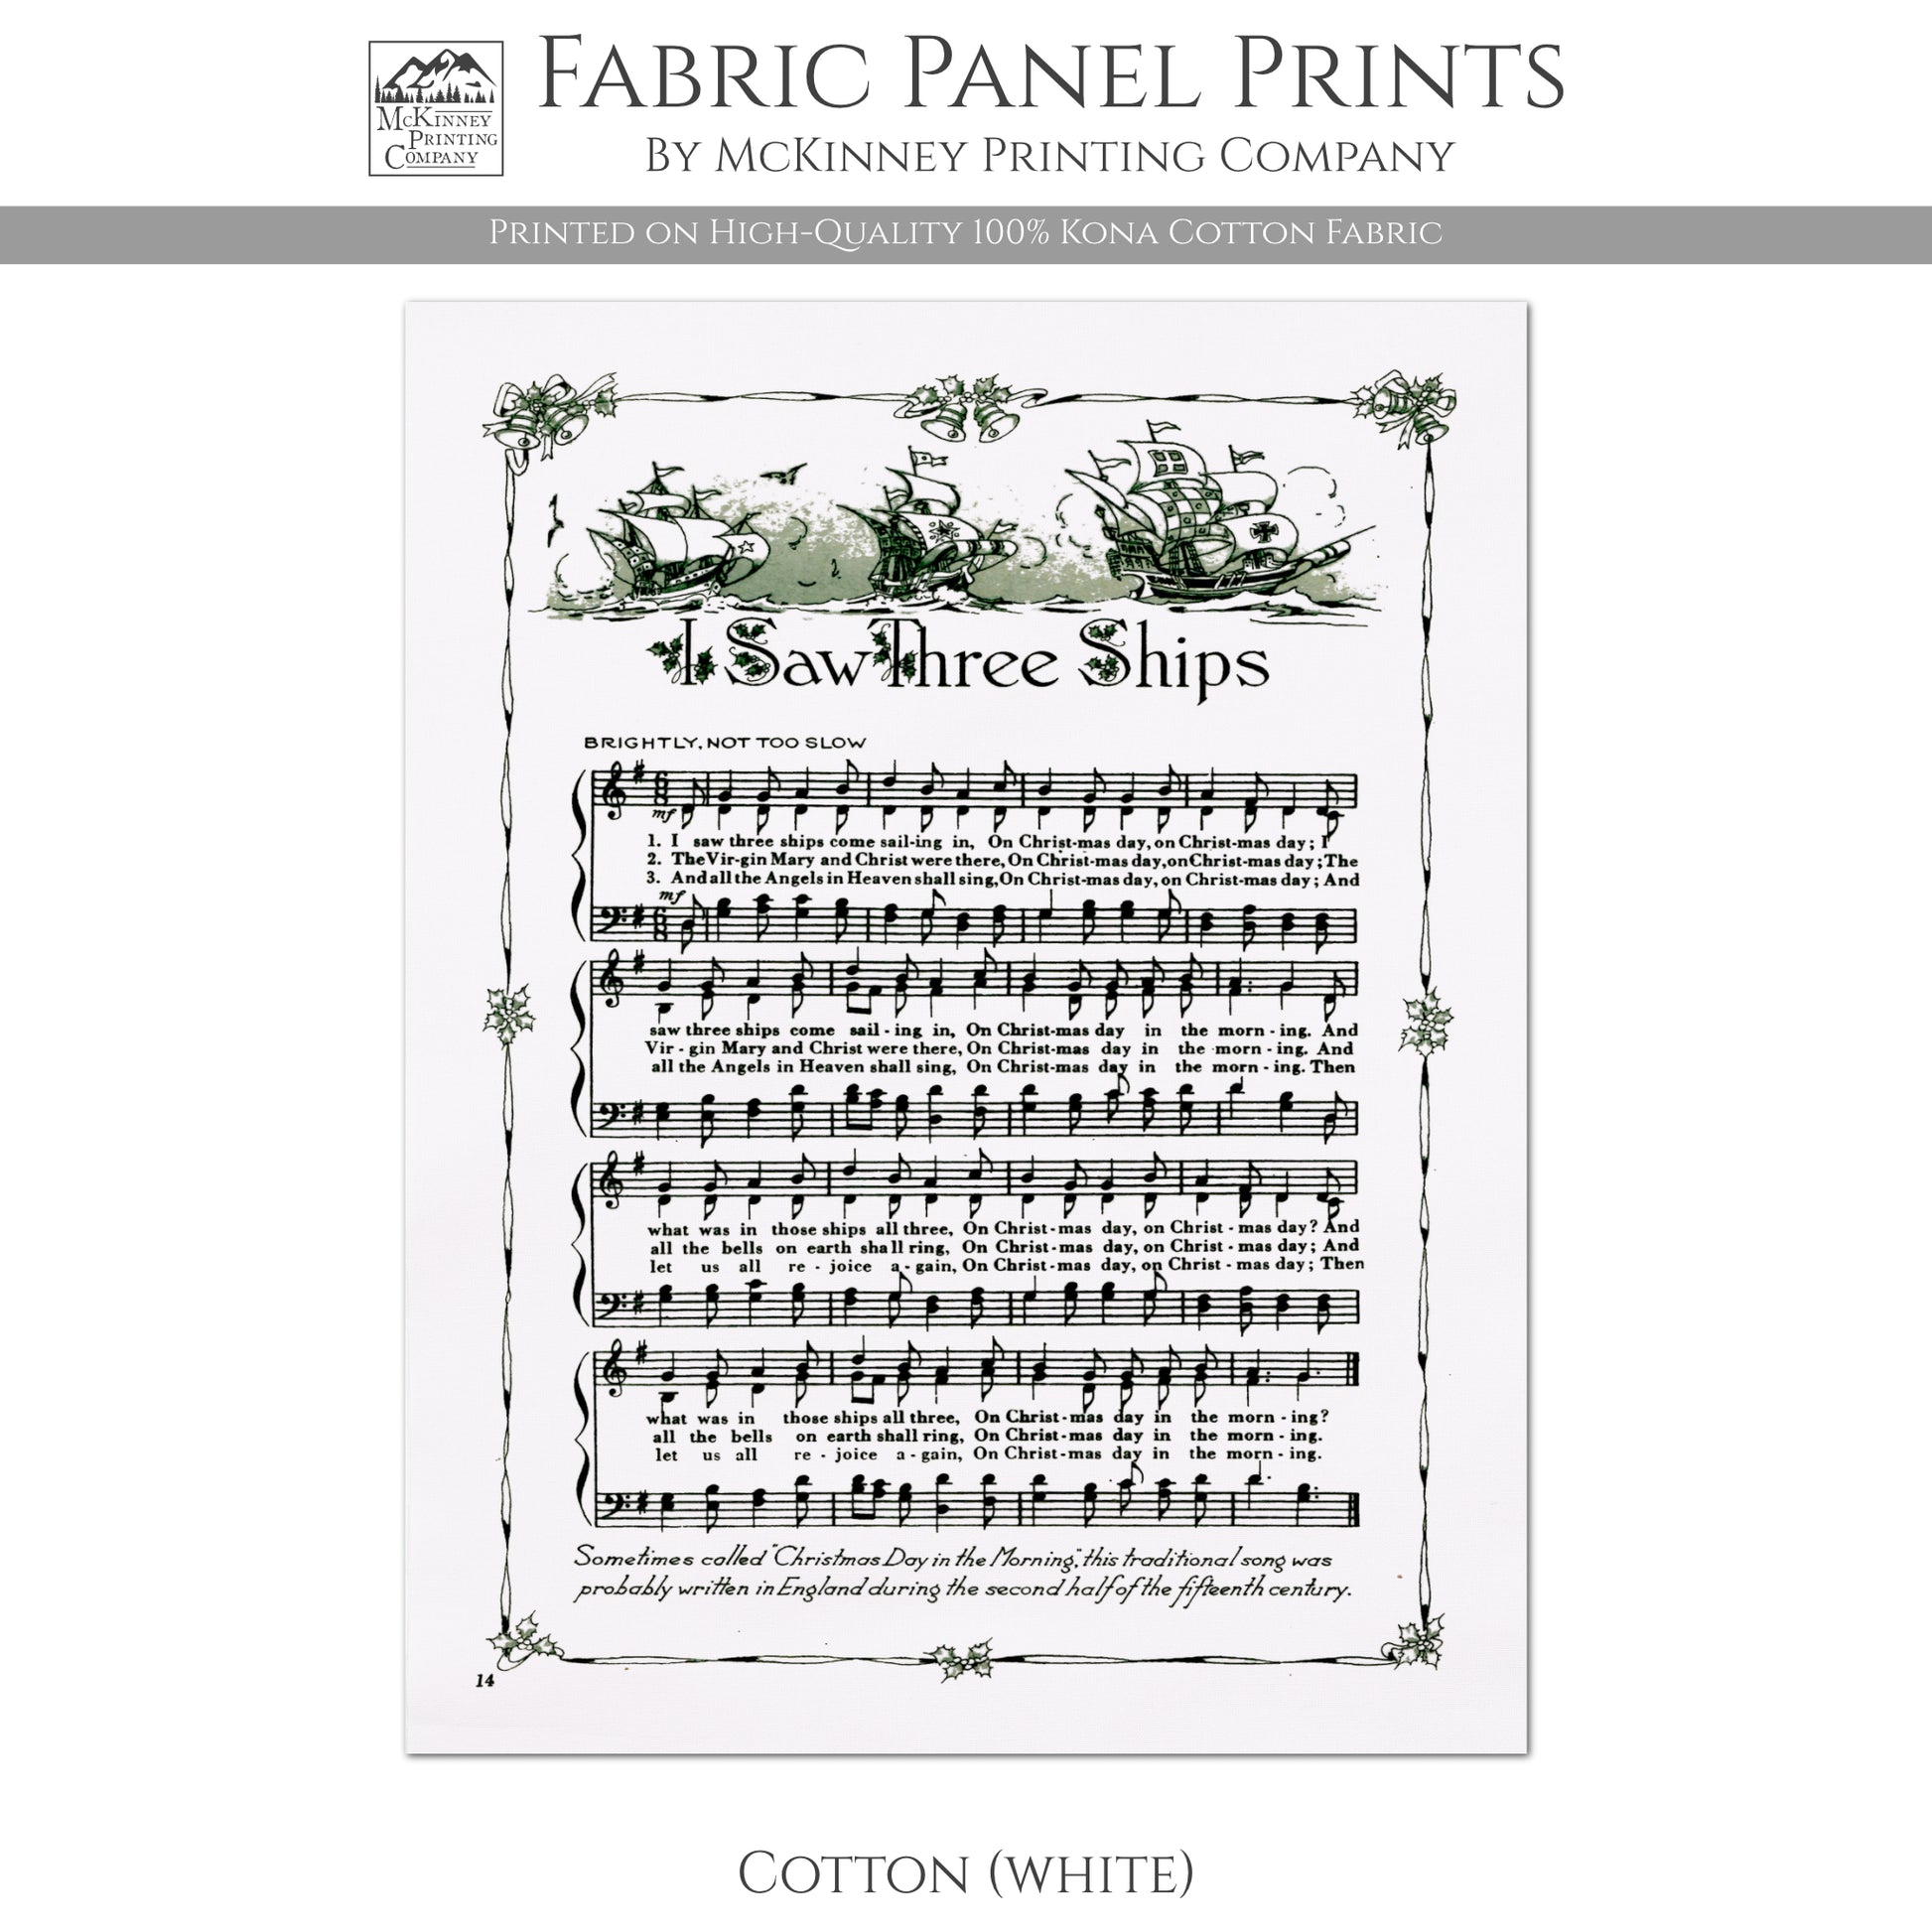 I Saw Three Ships, Antique Sheet Music, Fabric Panel Print, Christmas, DIY Sewing Project, Quilt Block, Craft - Kona Cotton Fabric, White